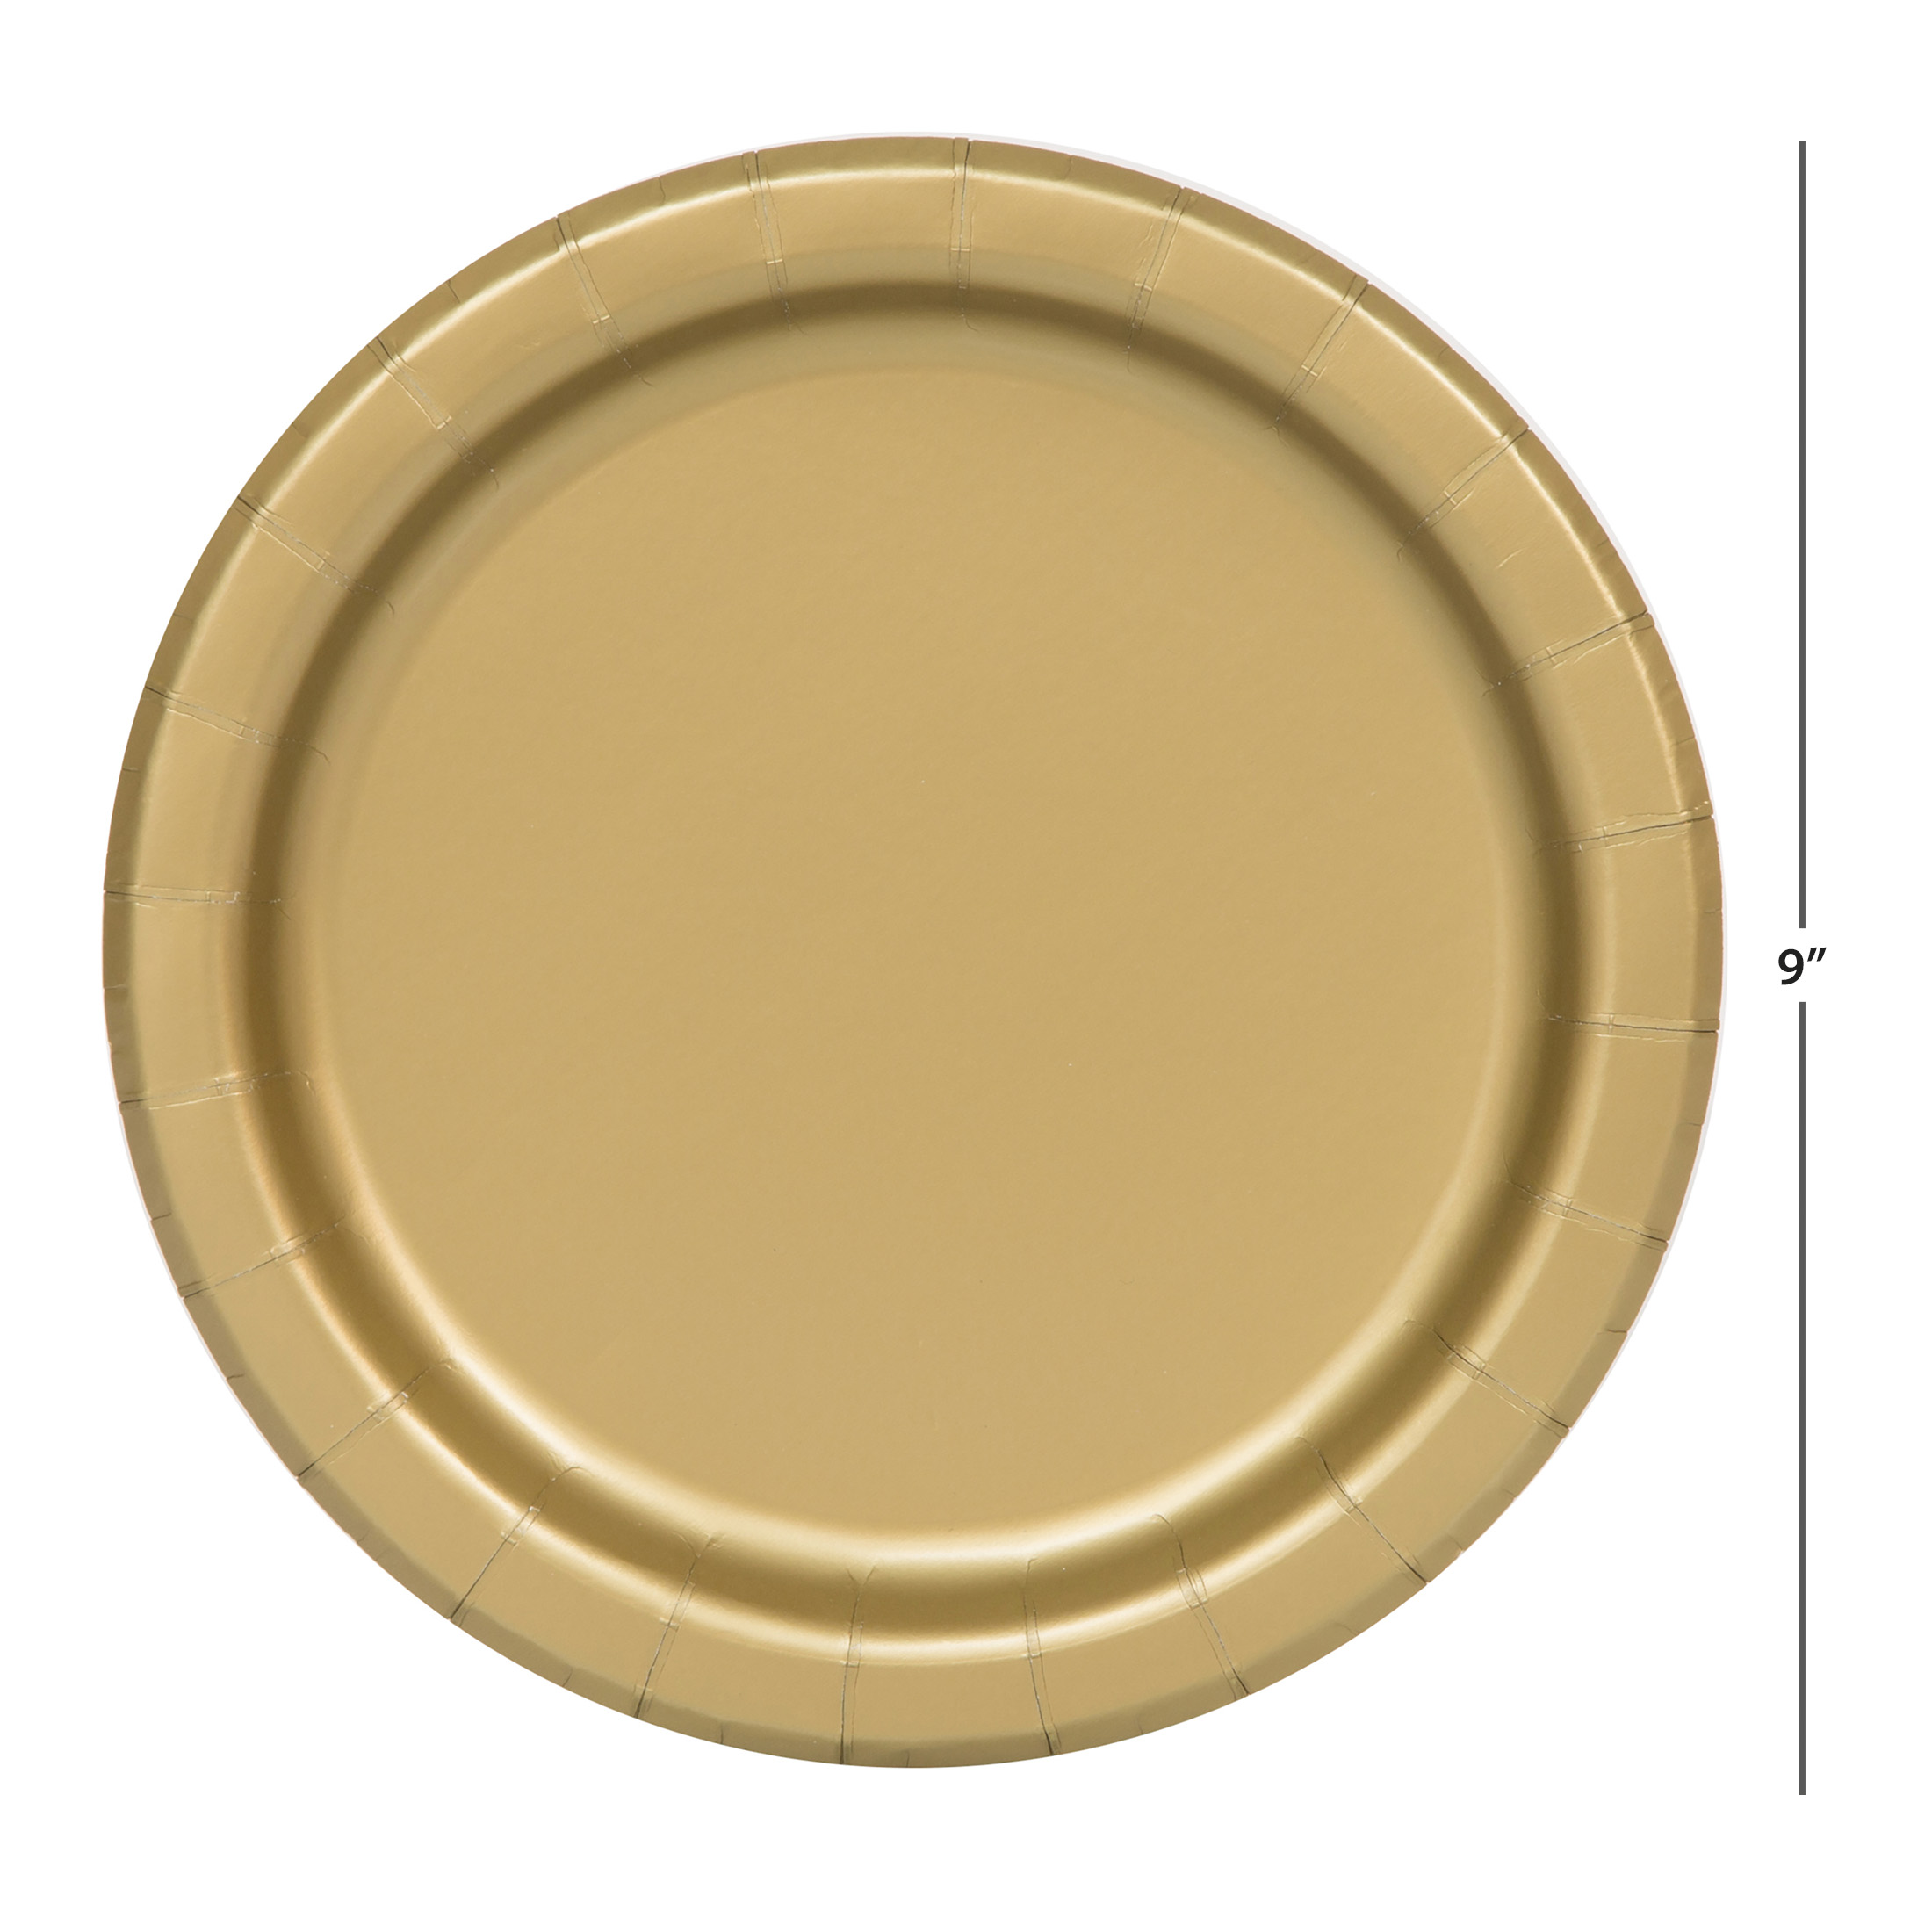 Way to Celebrate! Gold Paper Dinner Plates, 9in, 55ct - image 4 of 6